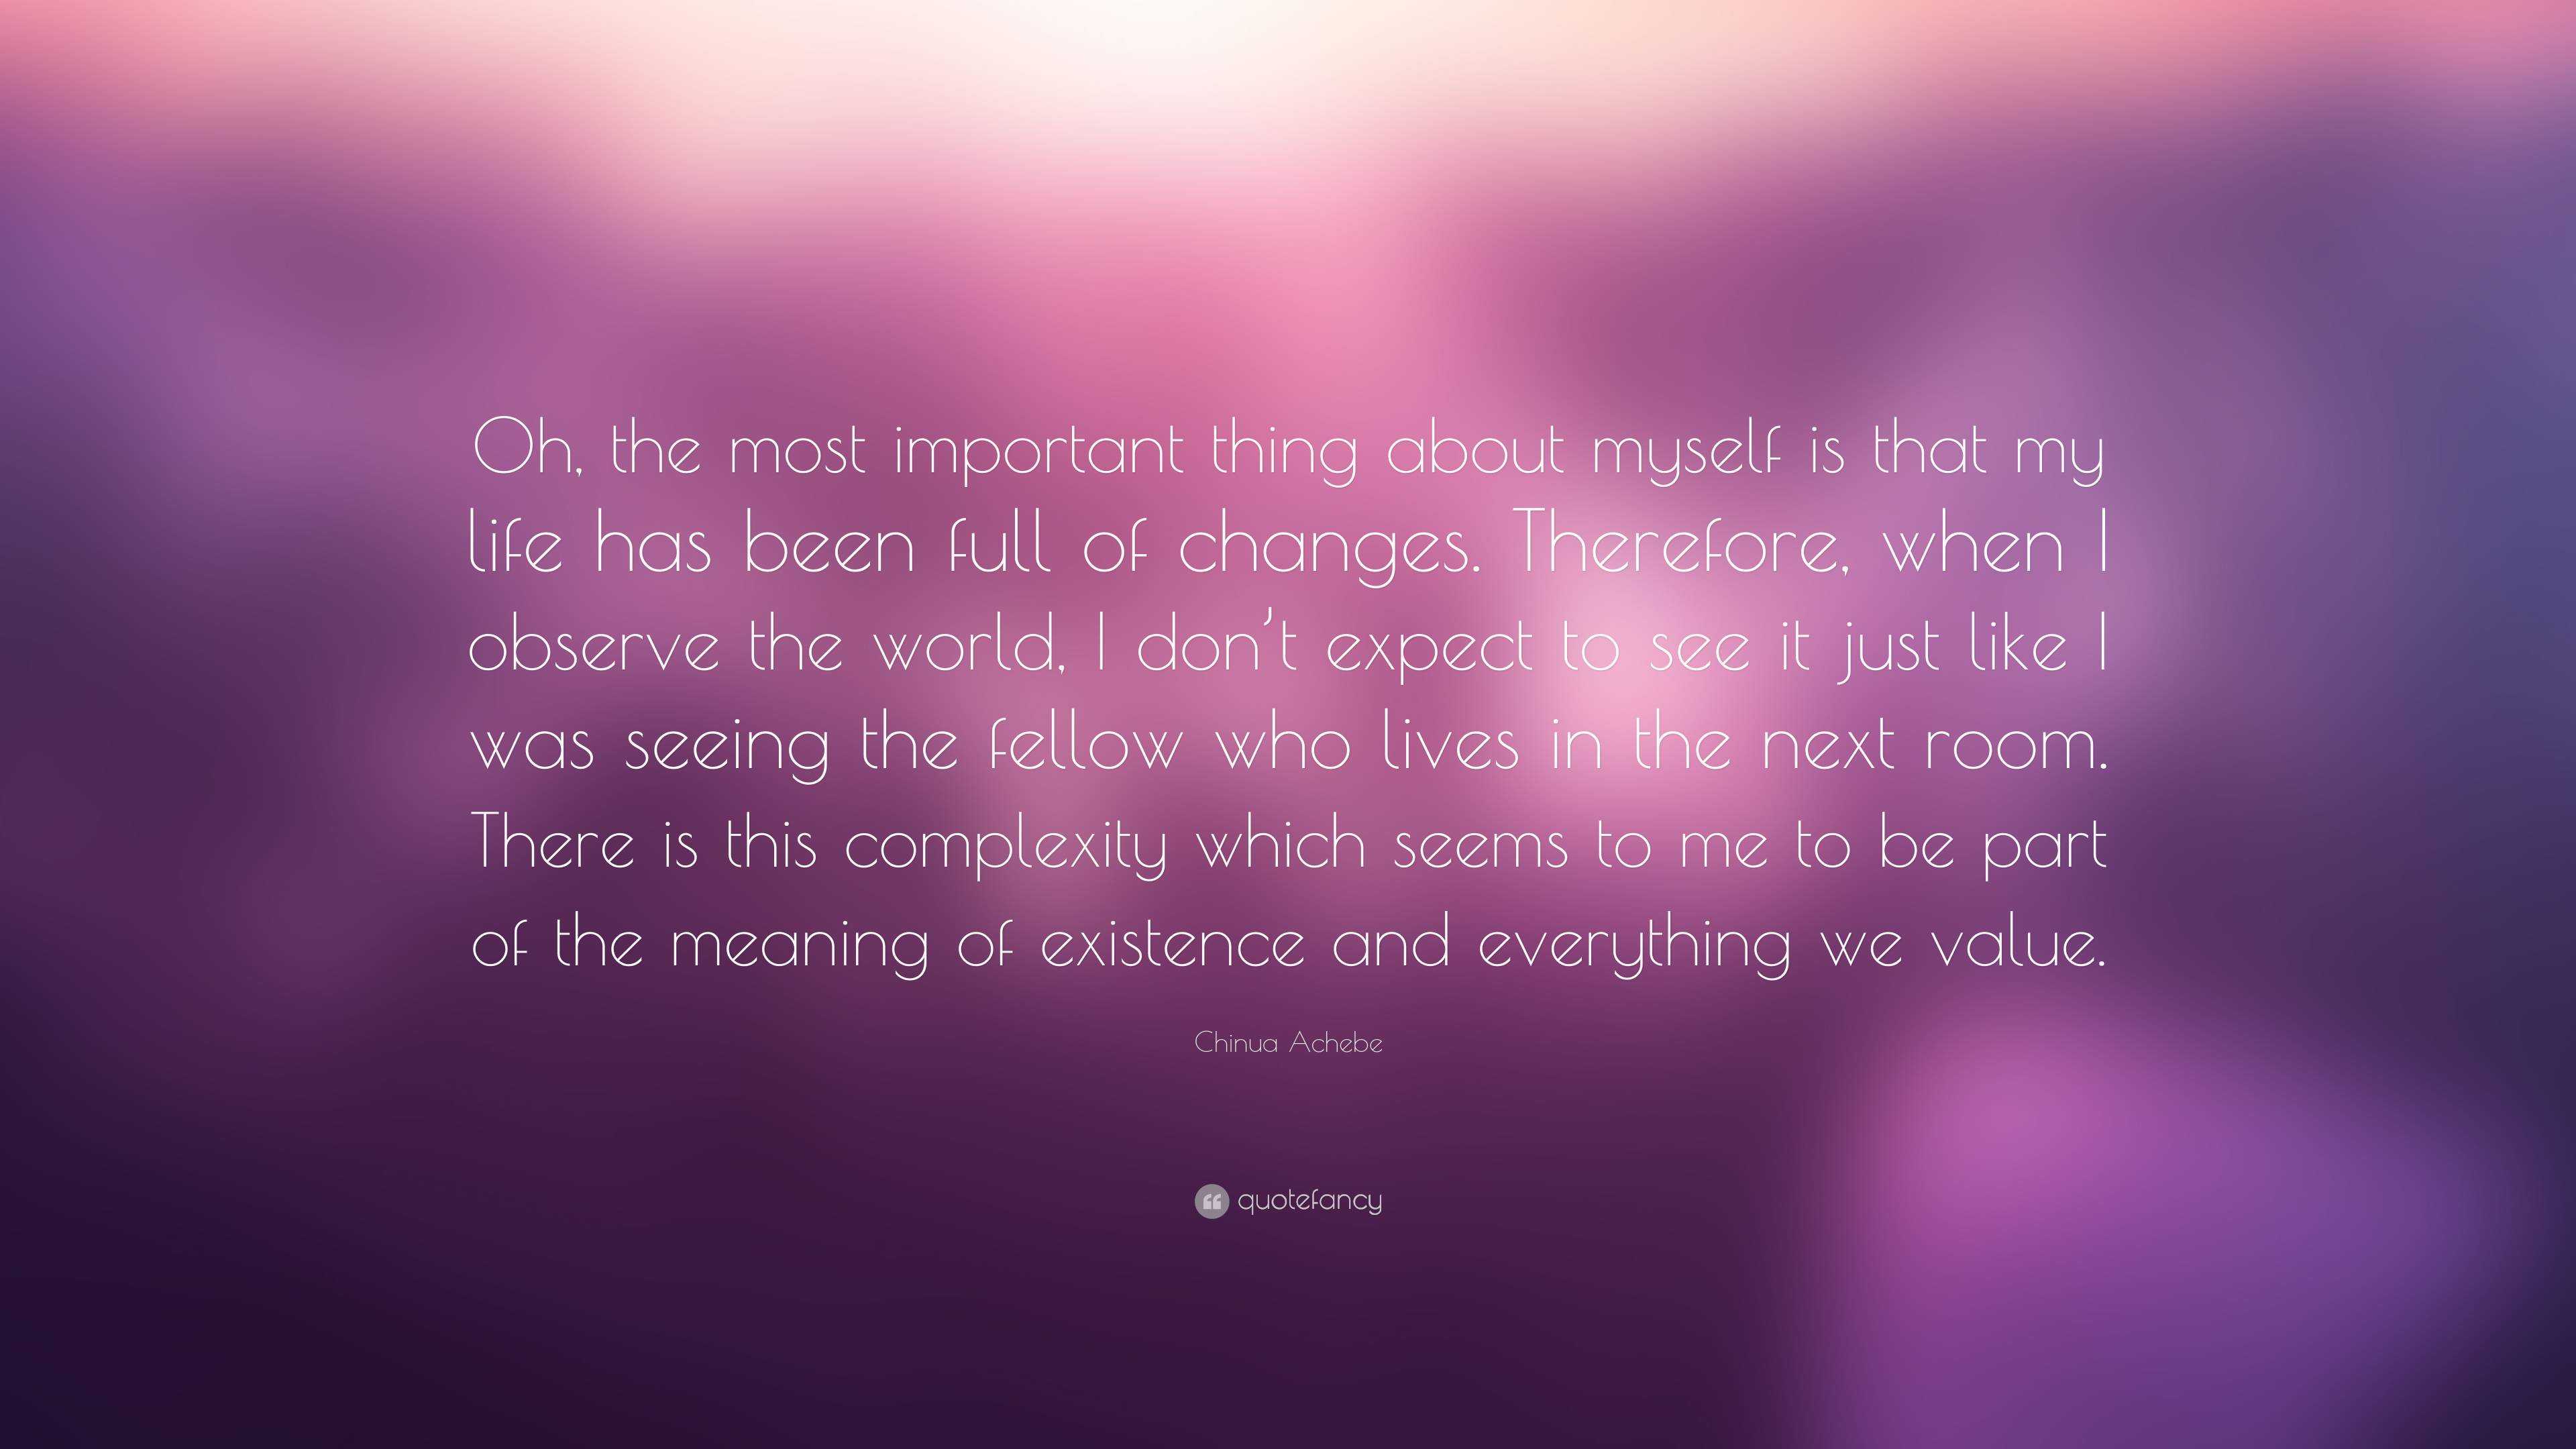 Chinua Achebe Quote: “Oh, the most important thing about myself is that ...